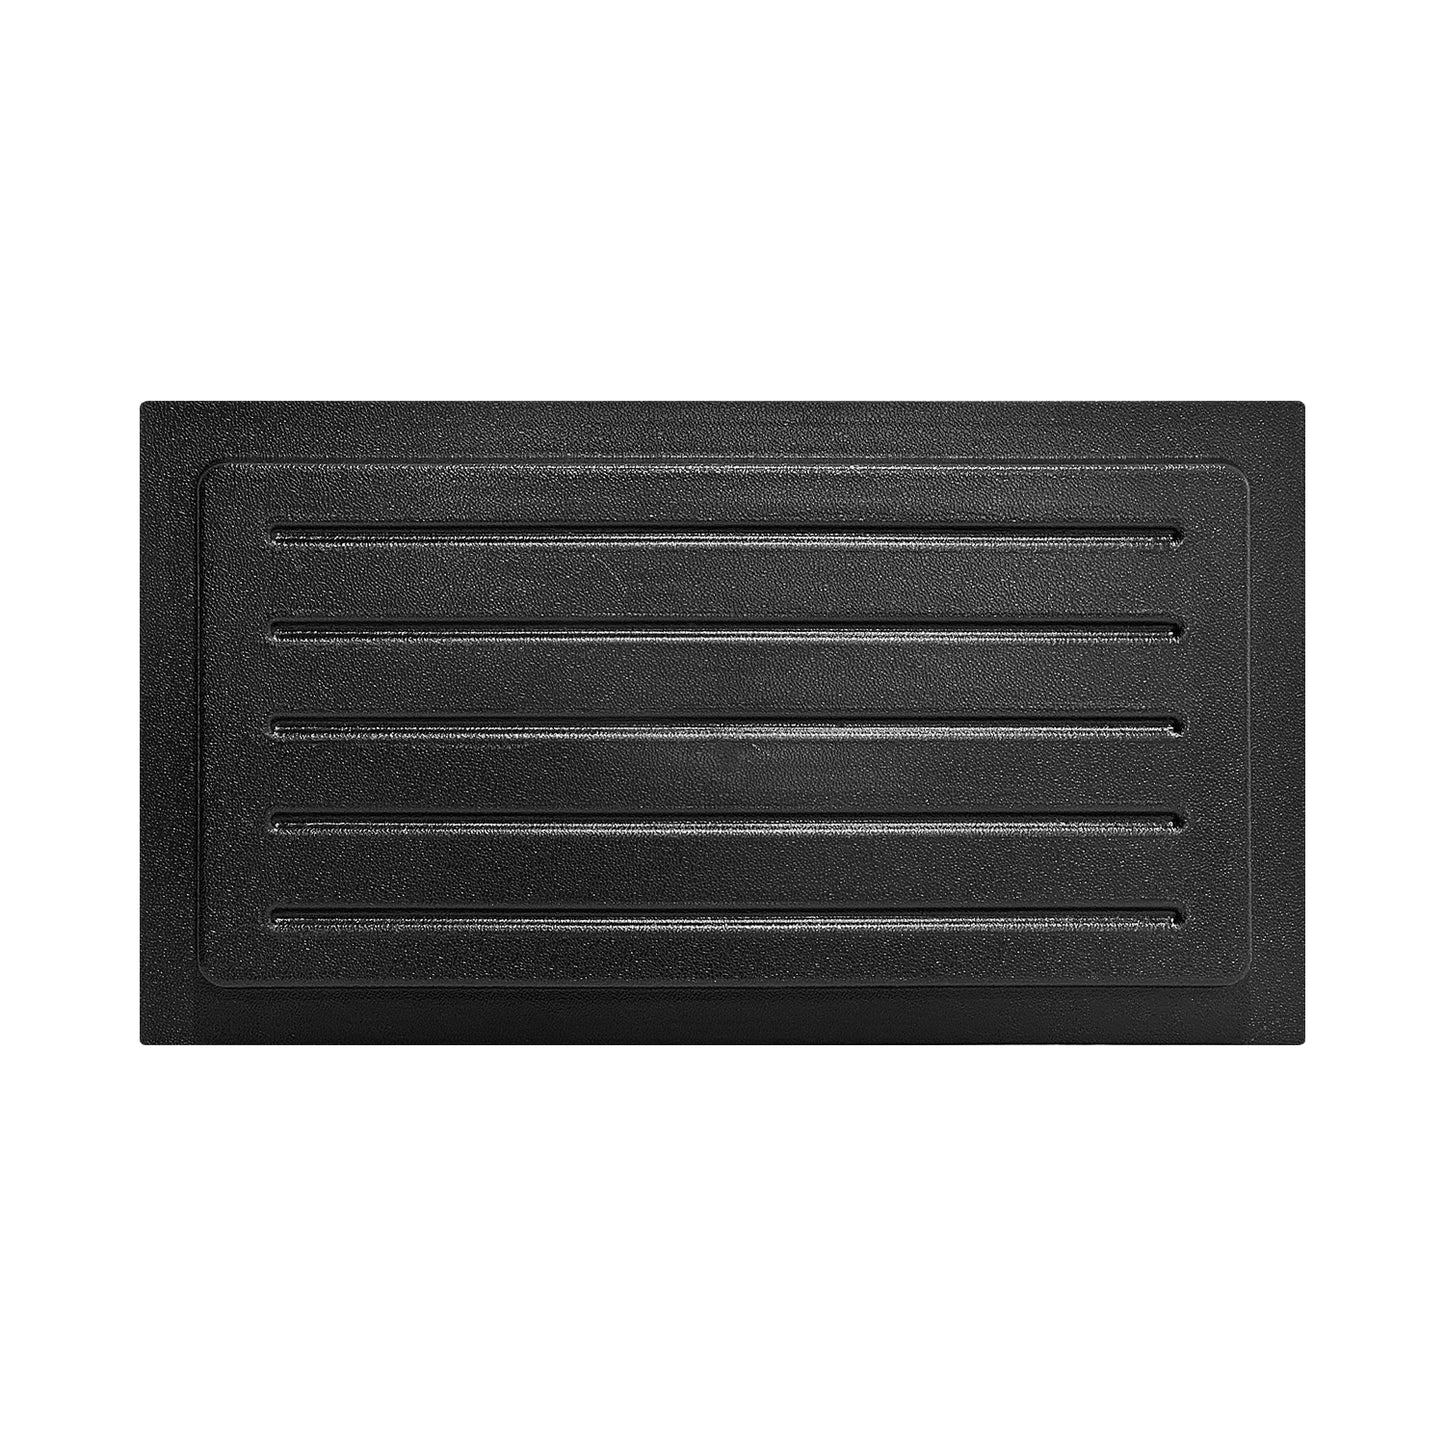 Small outward mounted vent cover (black)